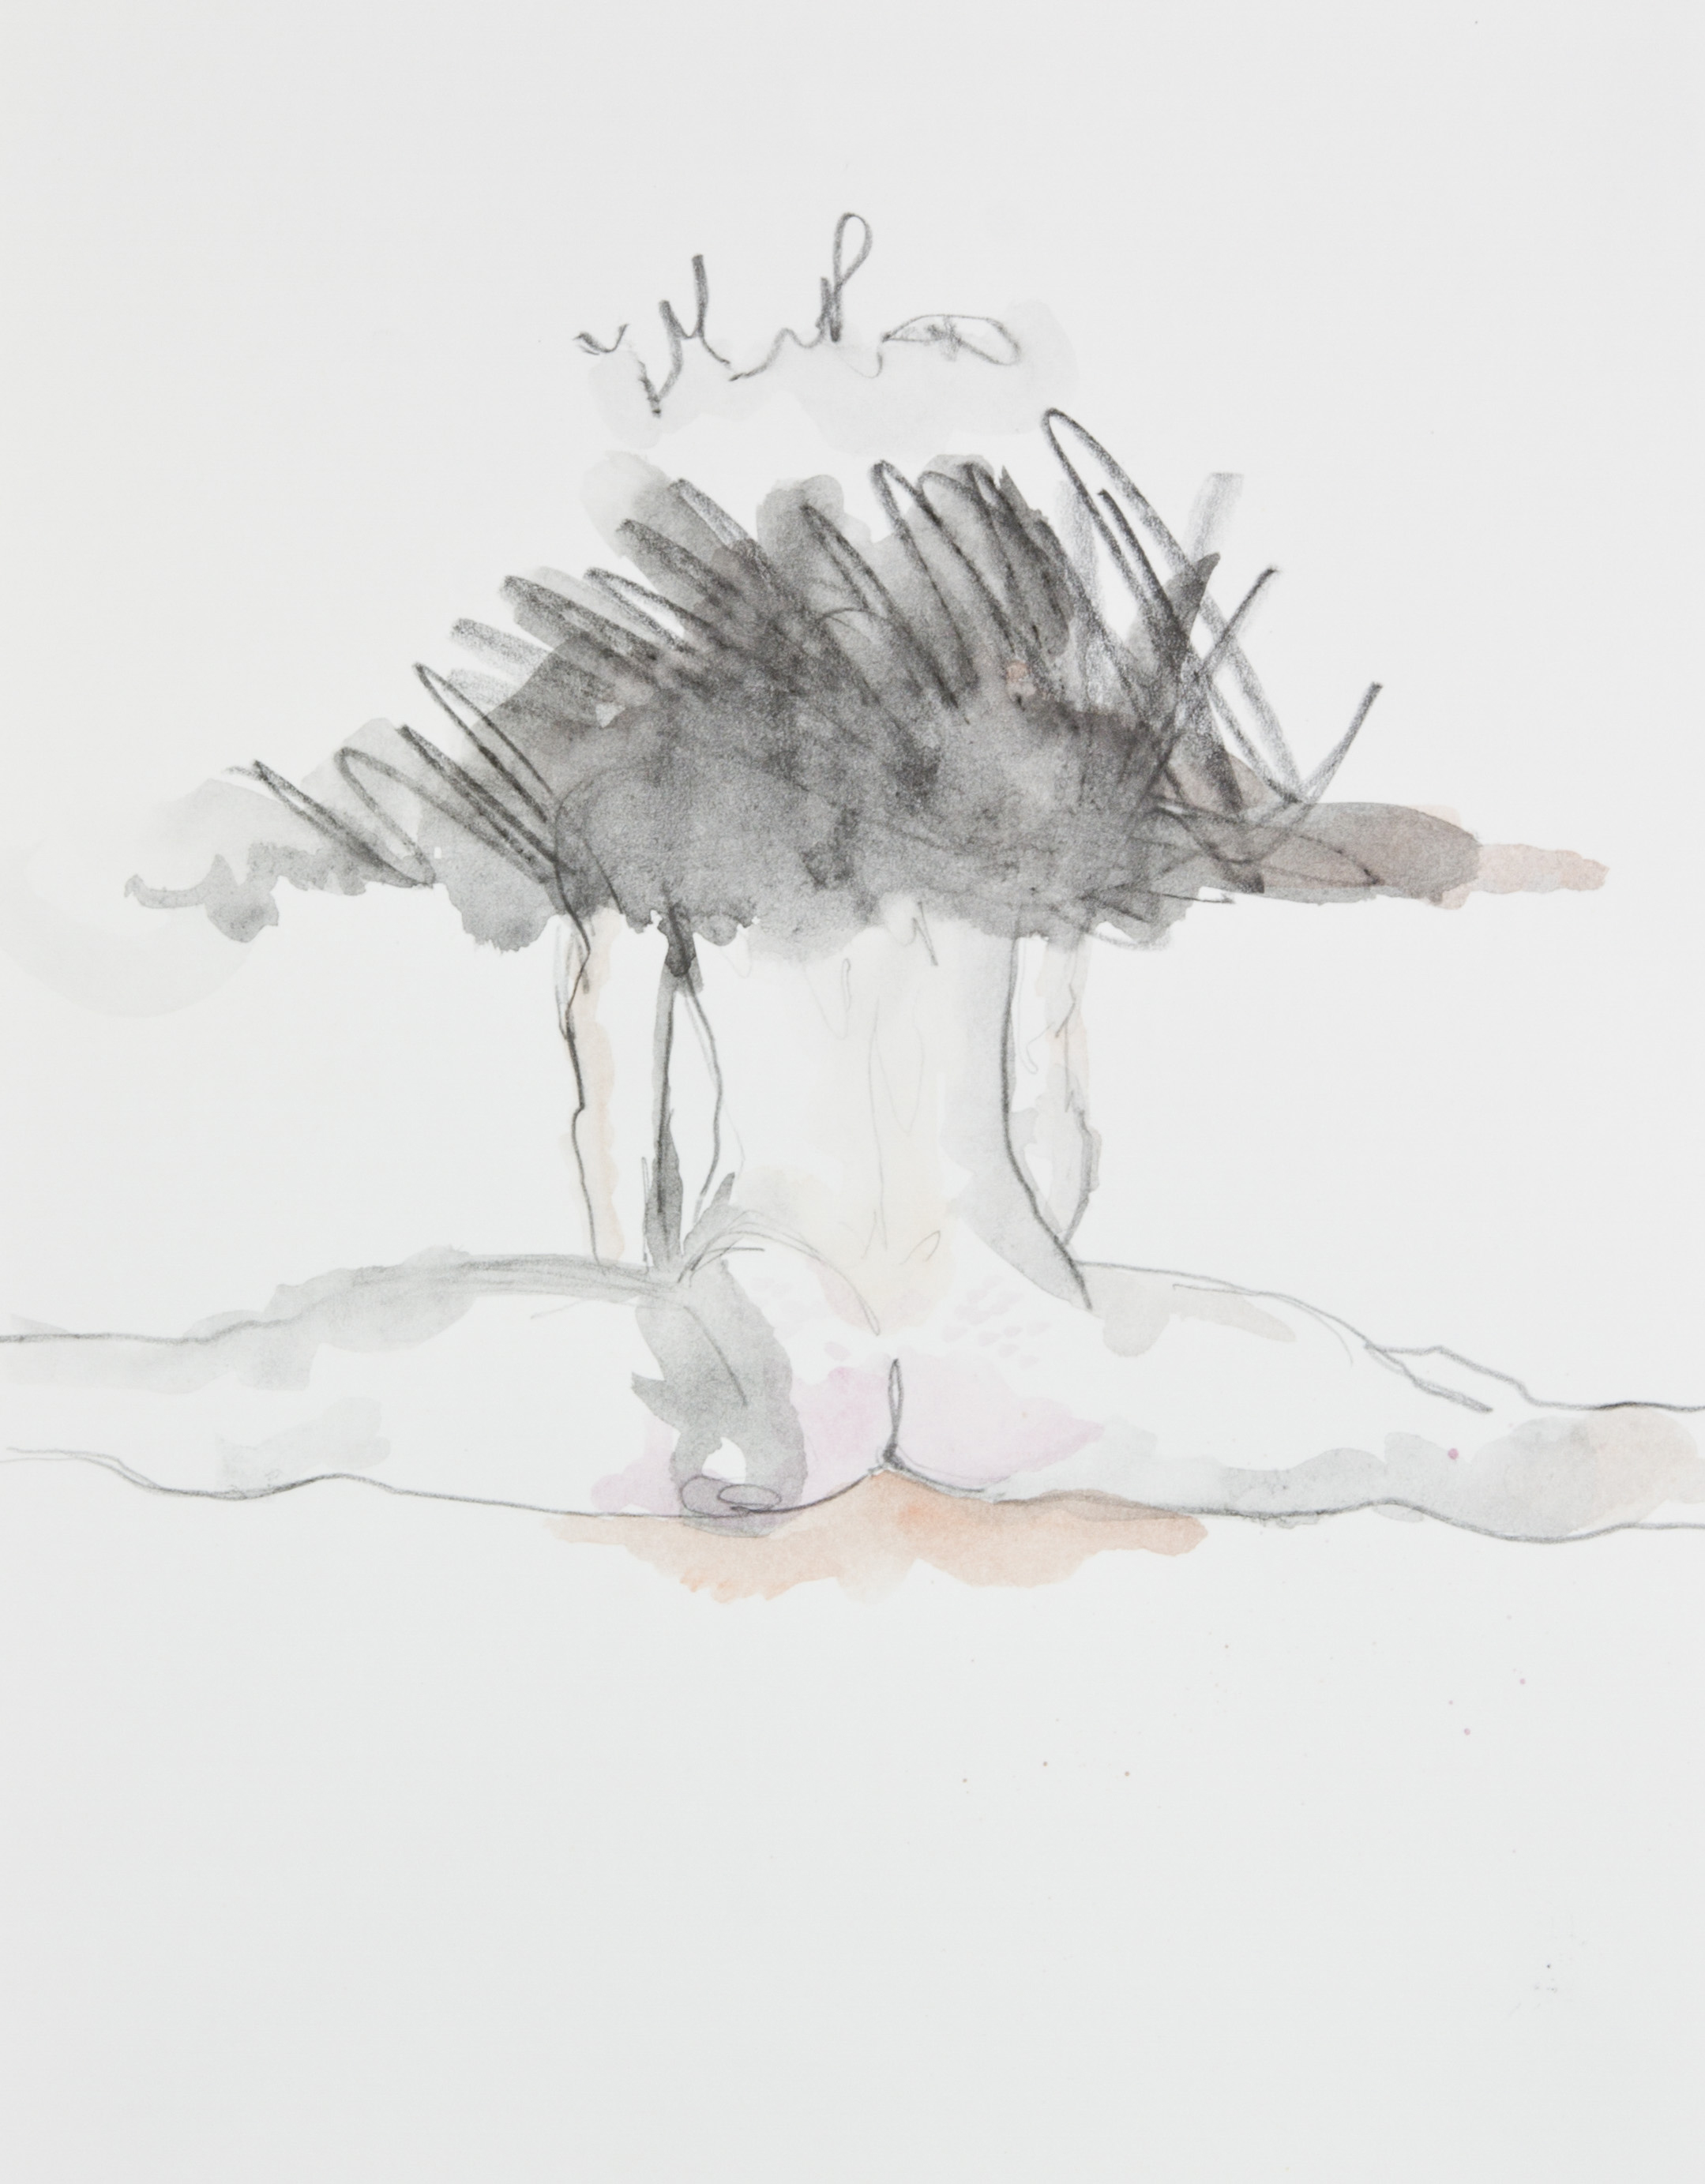 As Above So Below 2013, graphite and watercolor pencil on paper, 11x14 inches